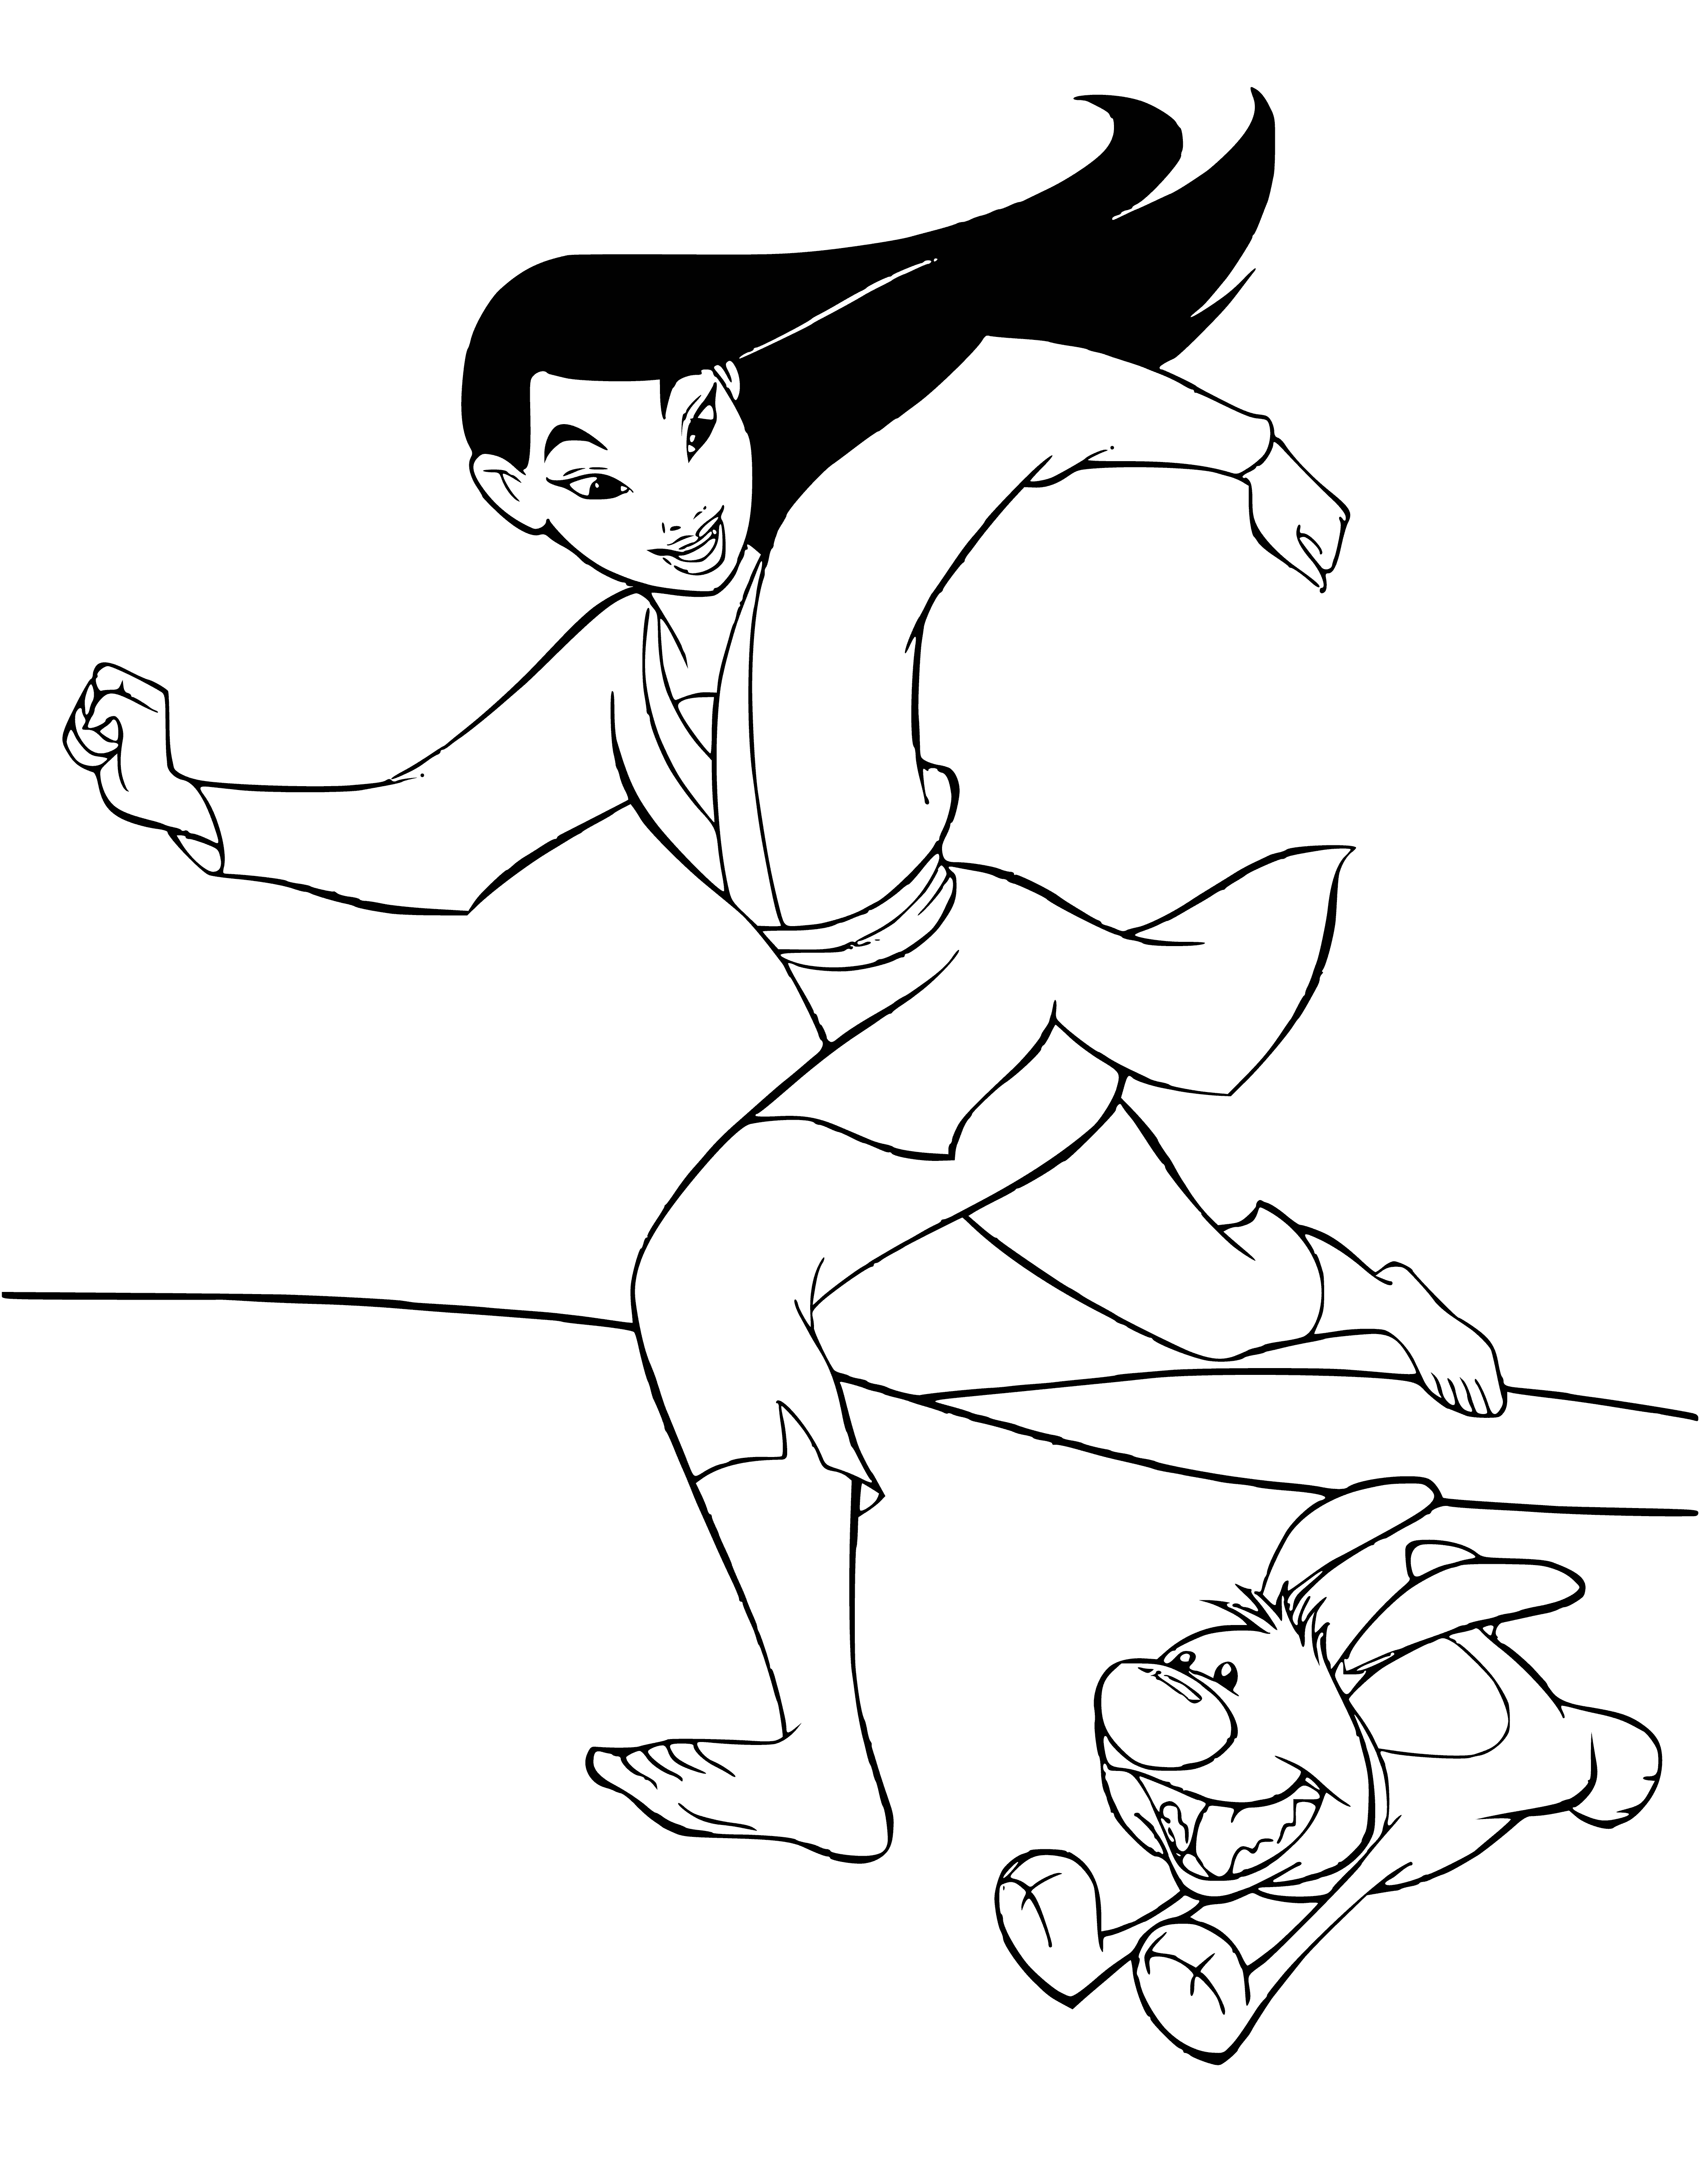 coloring page: Mulan runs through a grassy area in traditional Chinese clothing (red top & pants) with her hair in a bun, determined. #Mulan